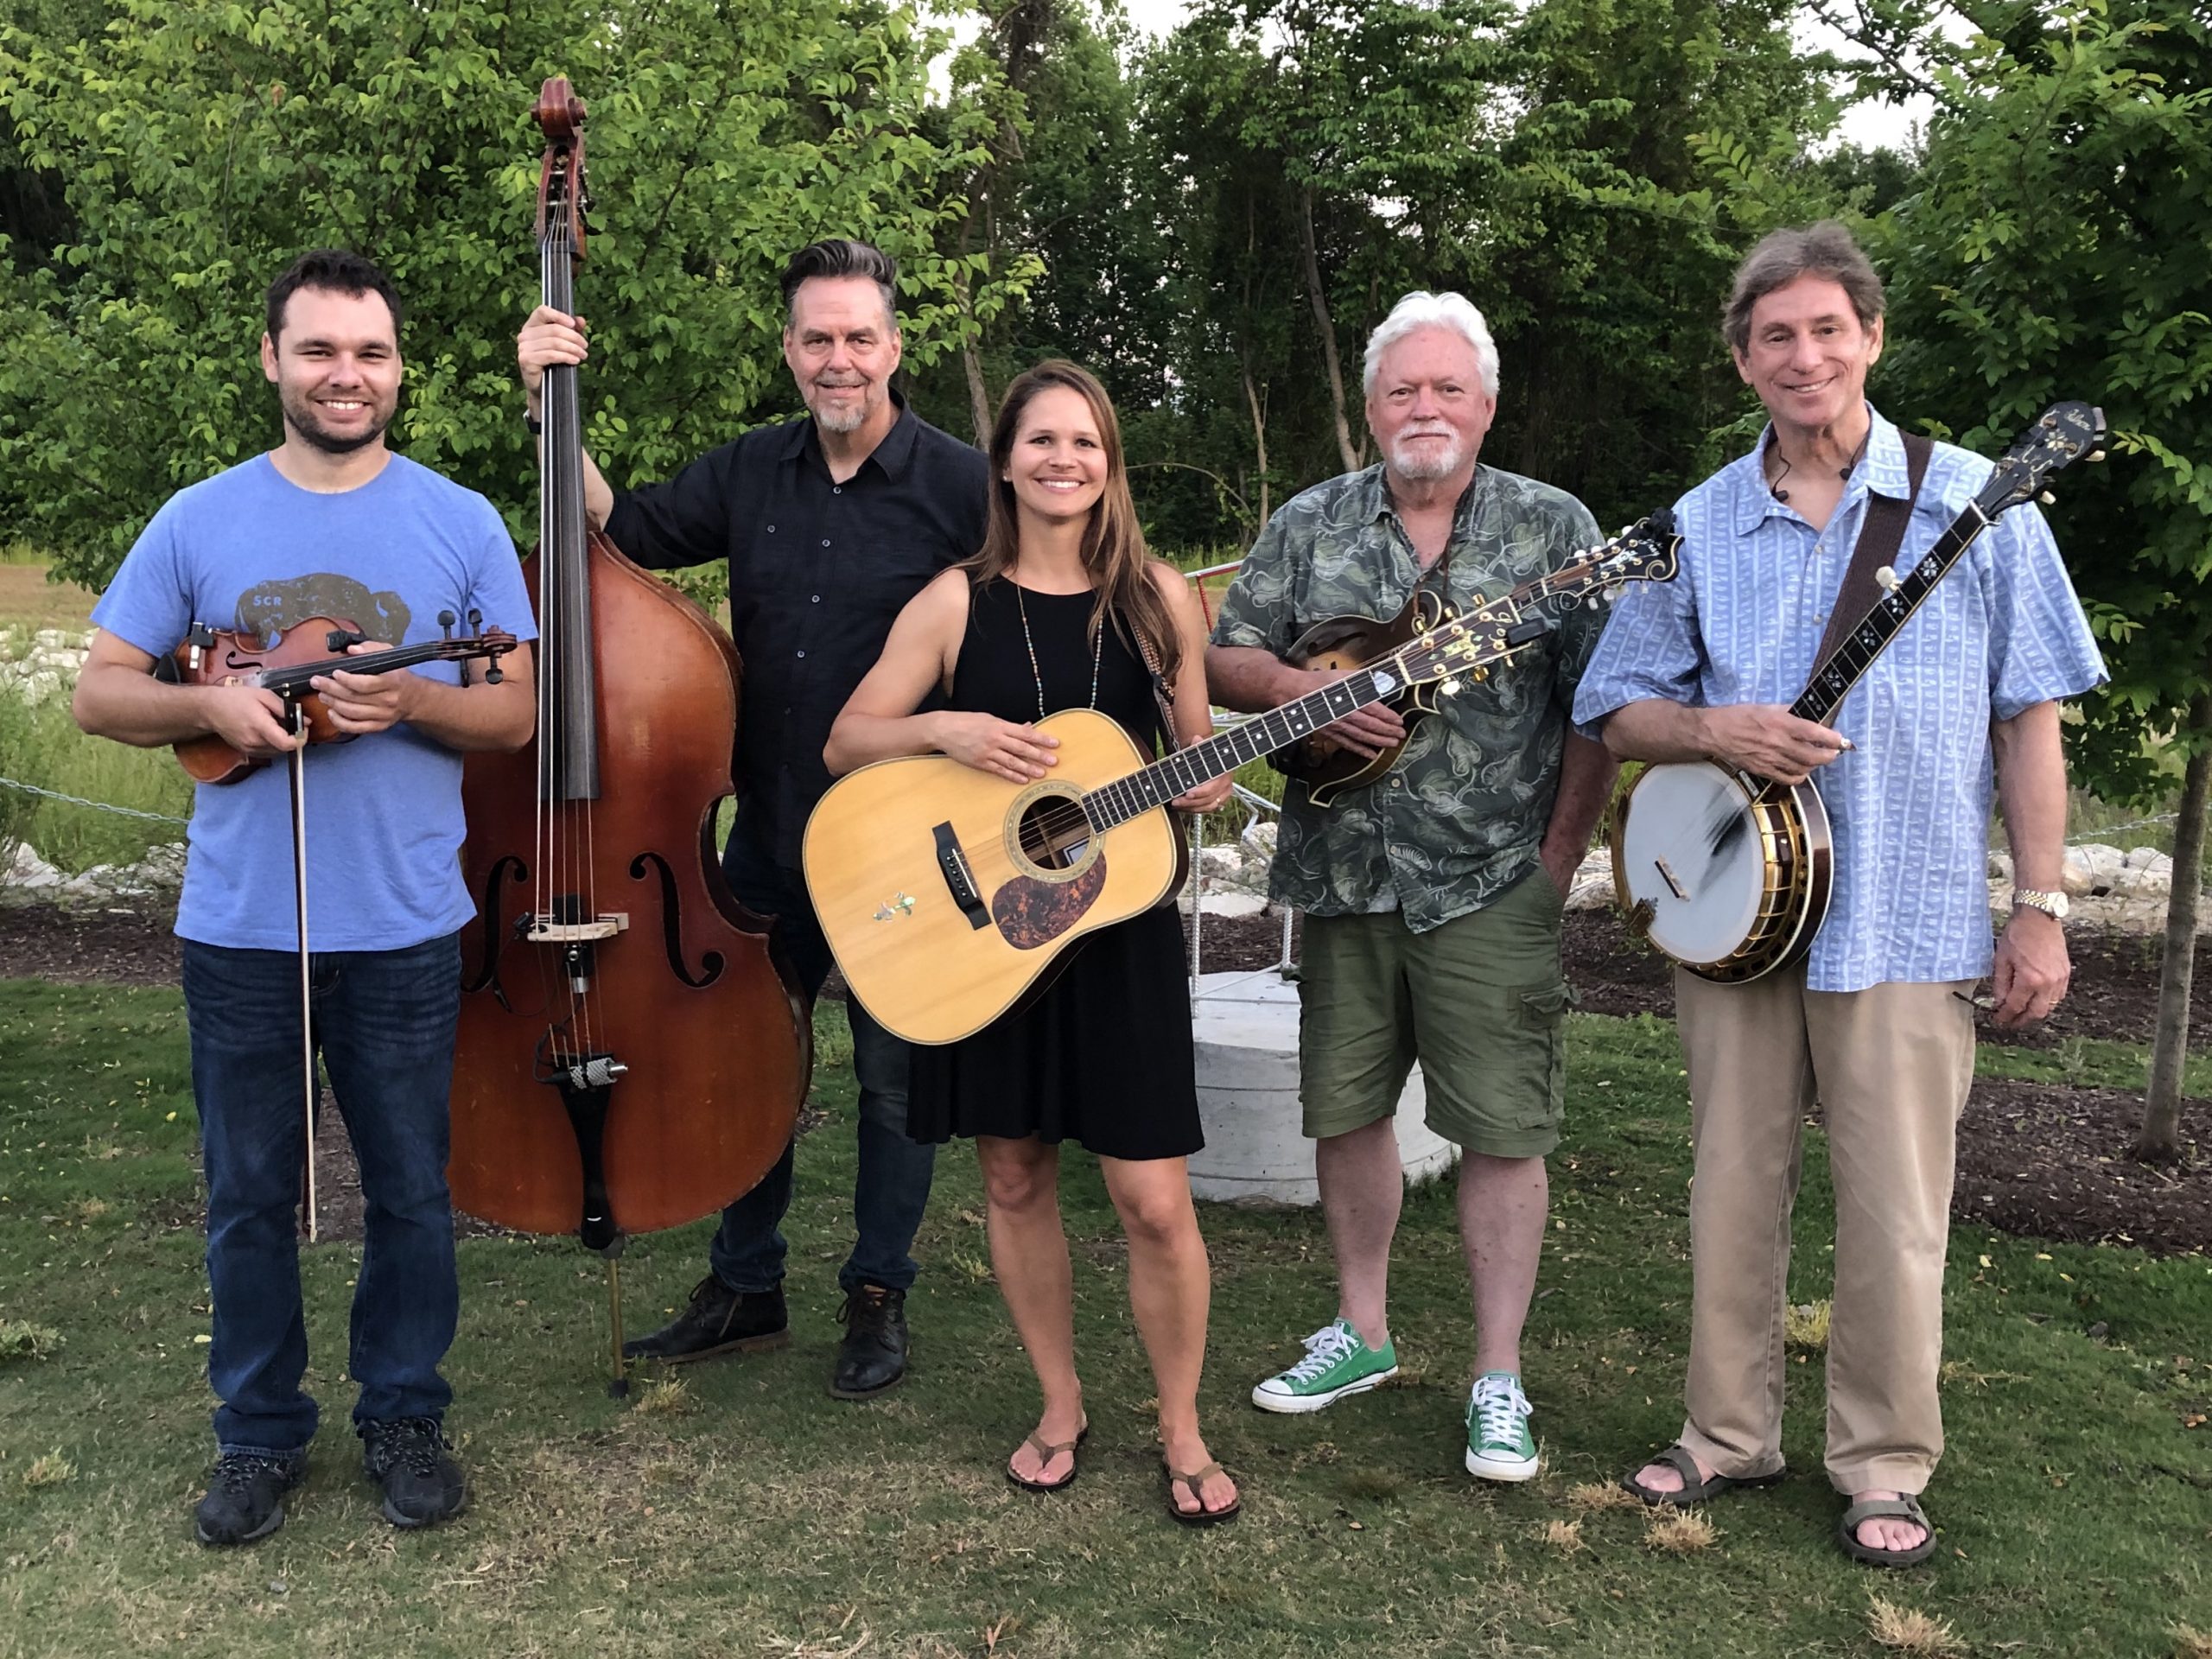  Jim Graddick, George Fulton, Lauren Tolcher, Steve Bennett, and Allen Fisher enjoy an afternoon of playing at Steel Hands Brewery in Cayce. 